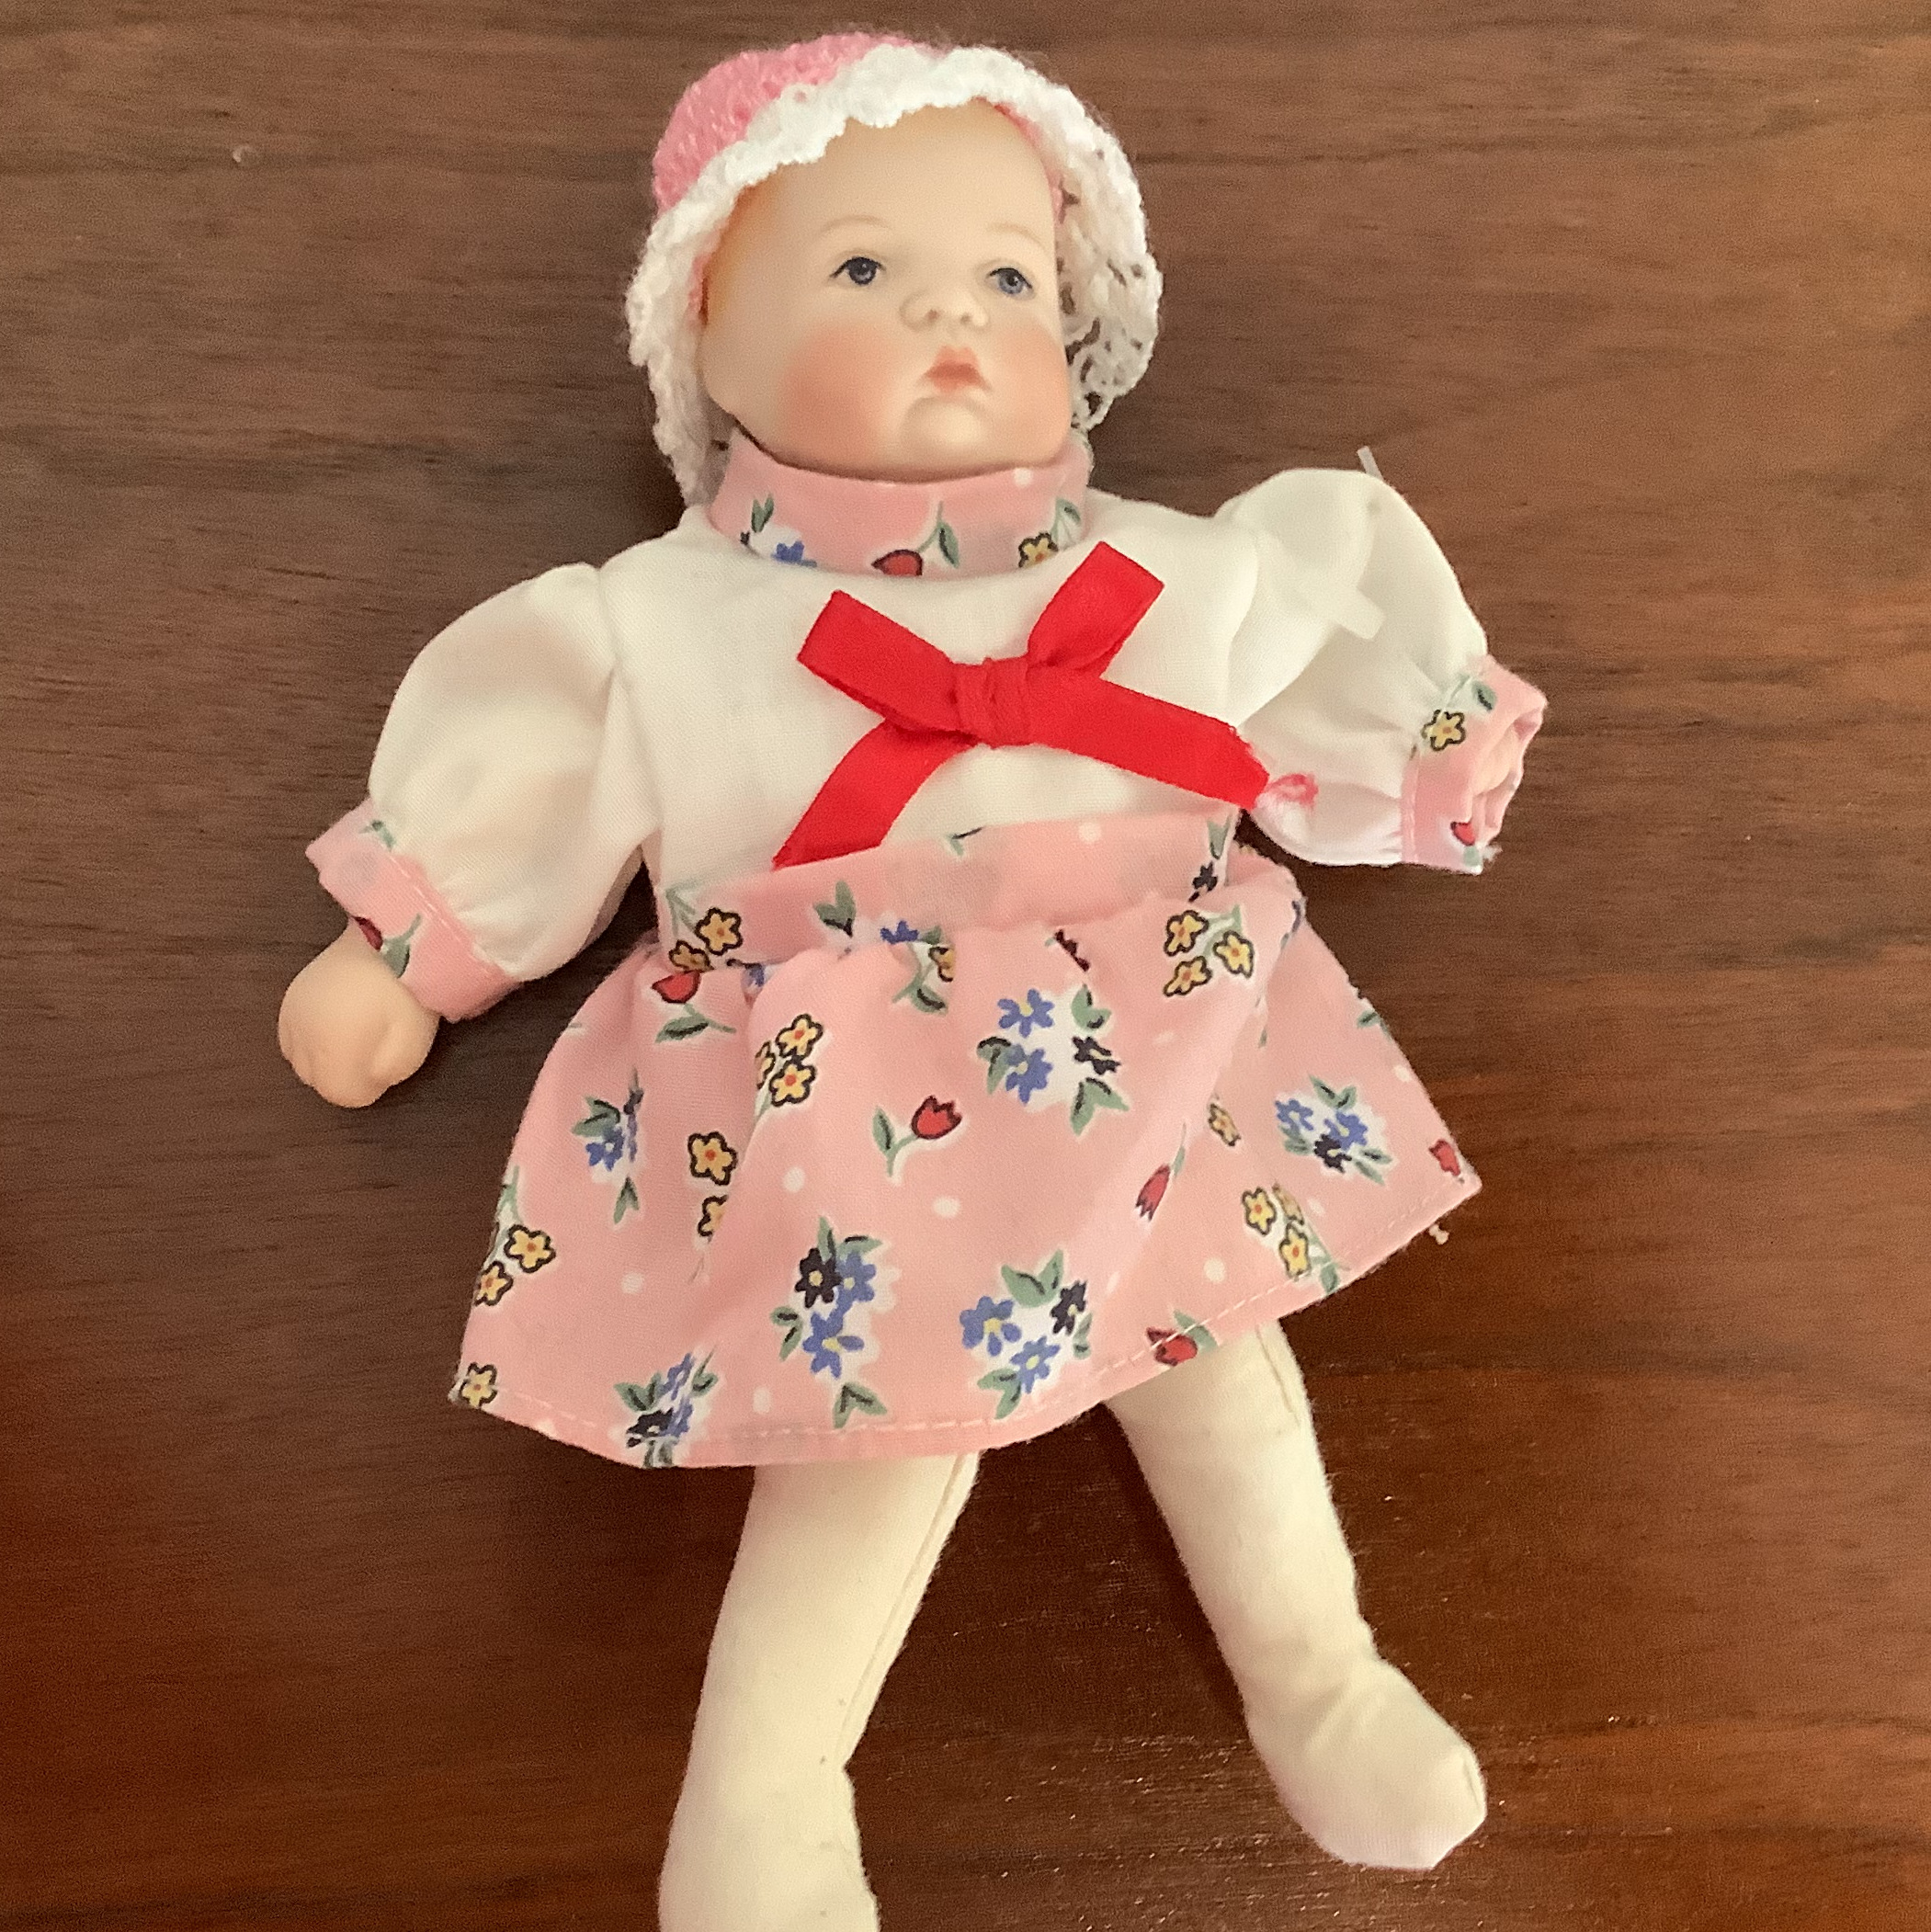 7-inch modern doll Sarah in white and pink dress, lying on a table